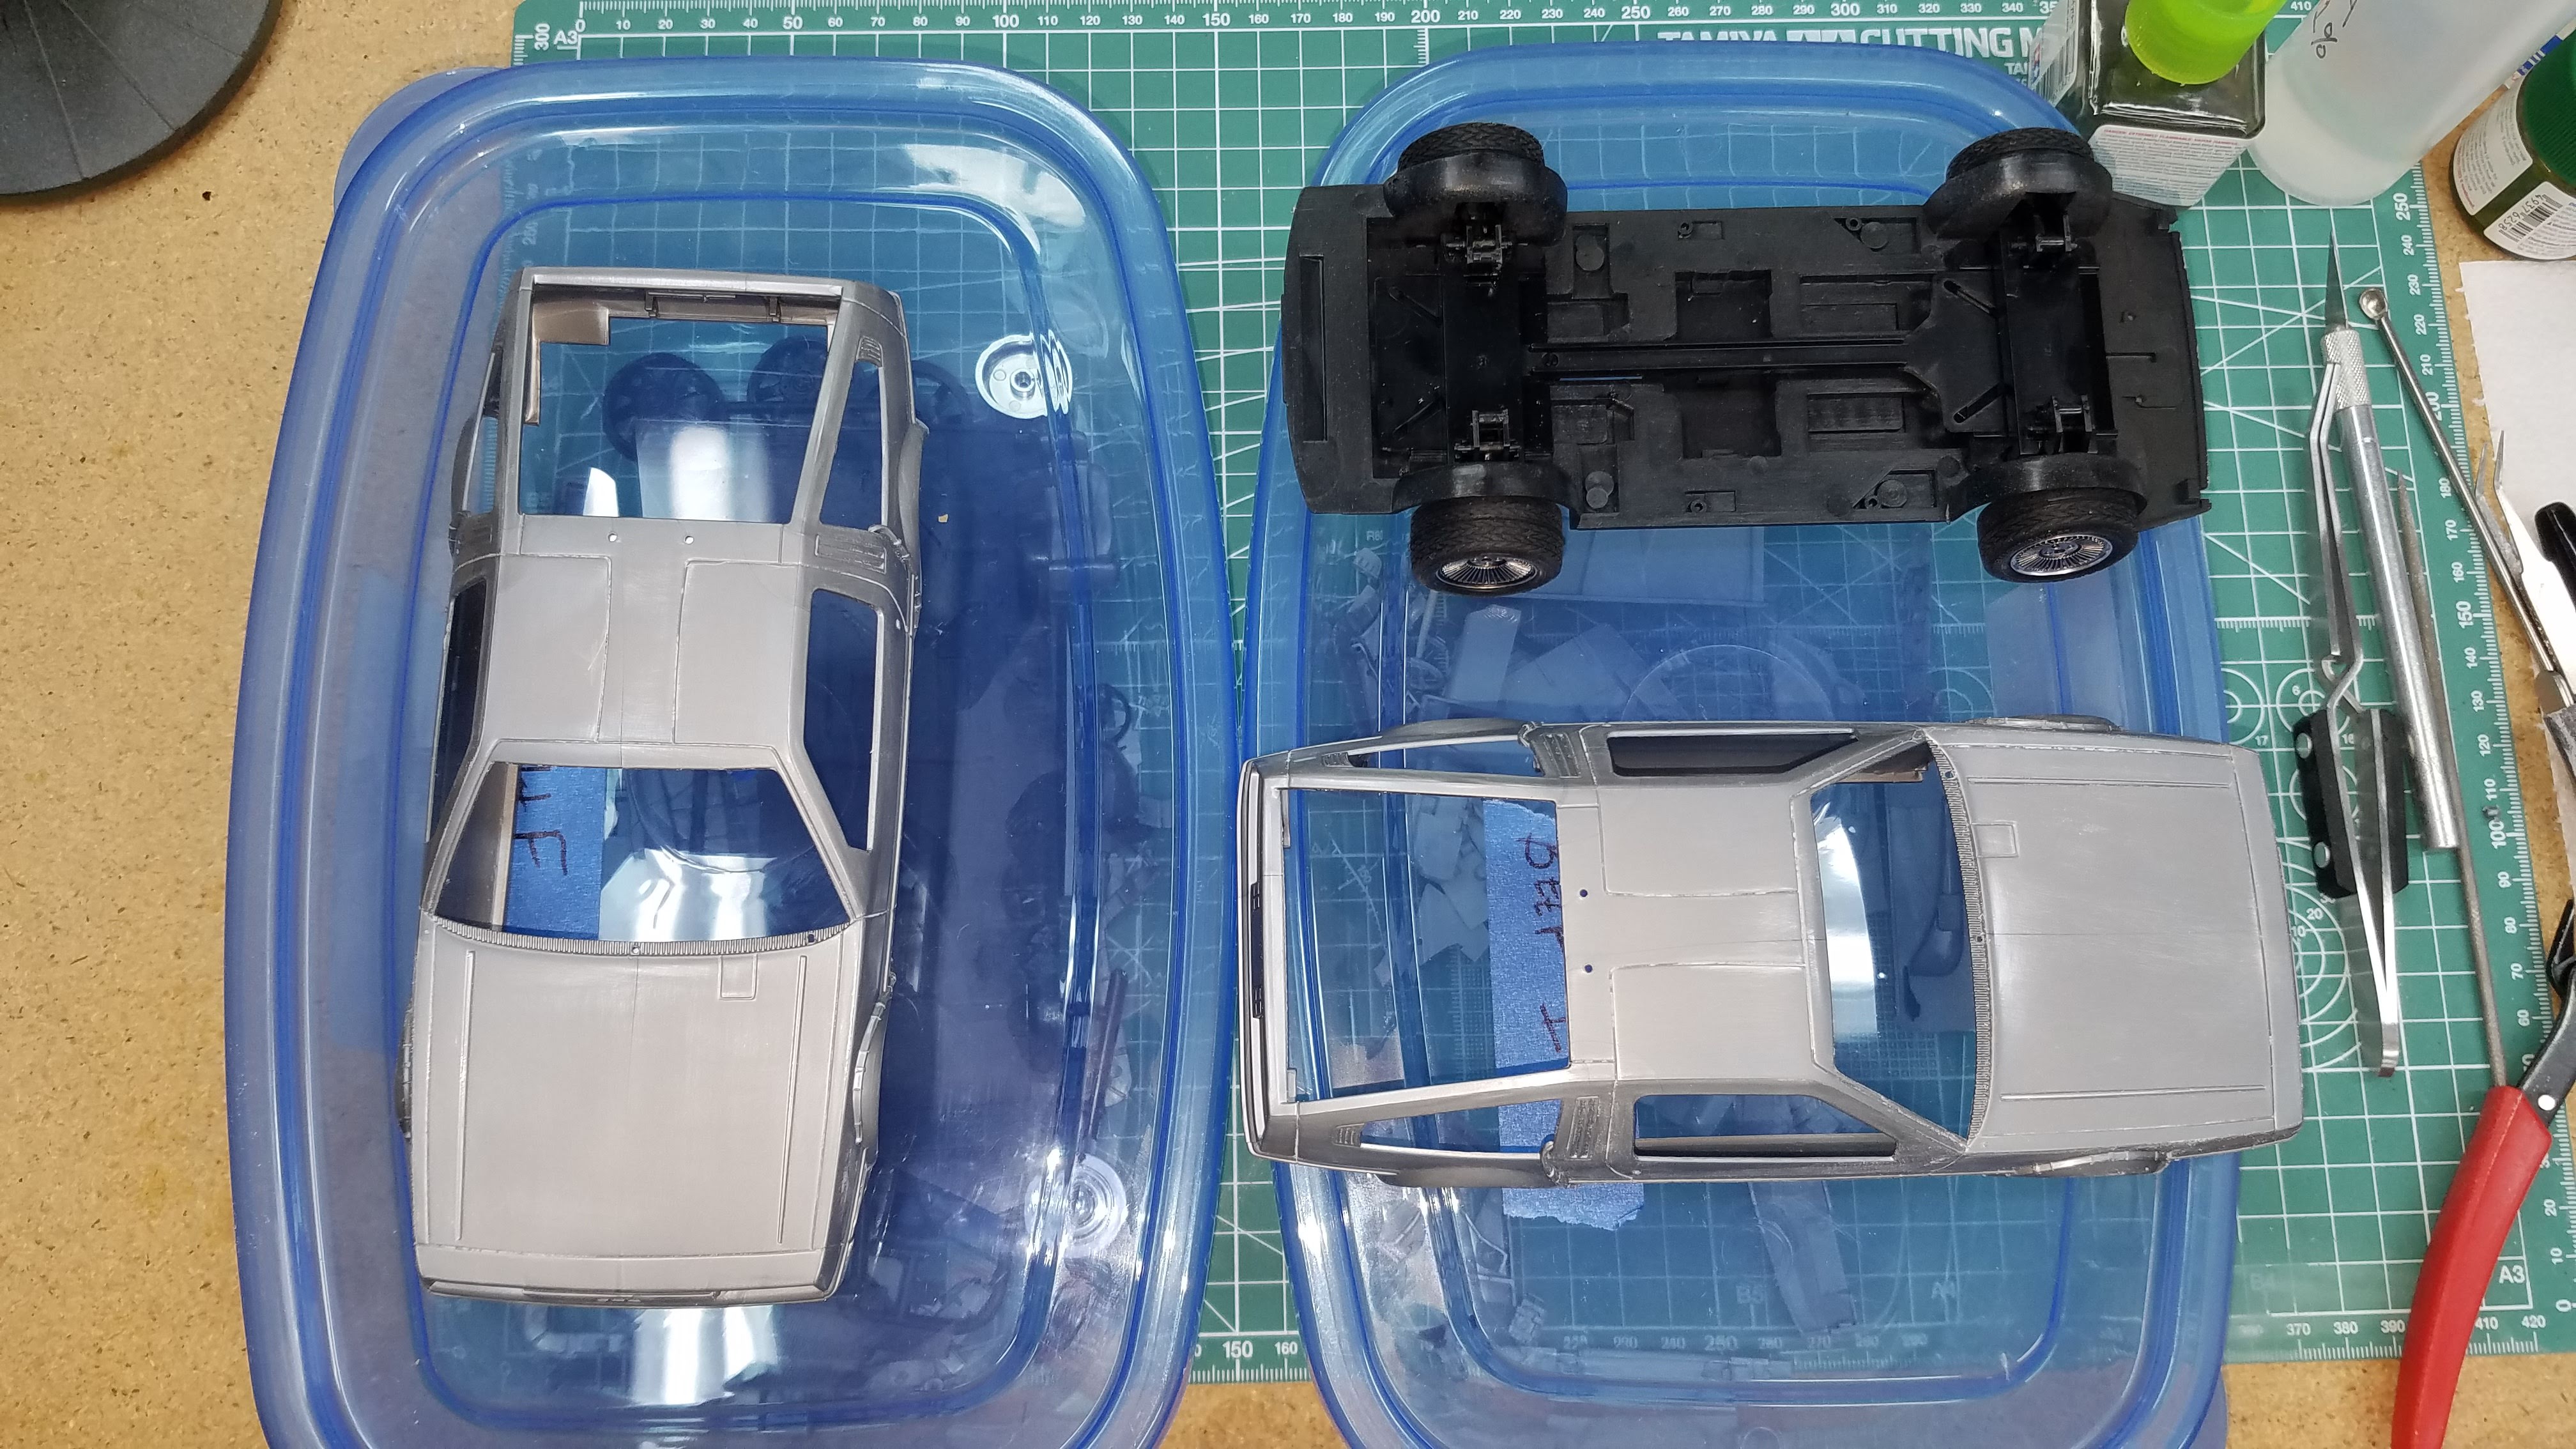 Back to Future I & III kit parts separated